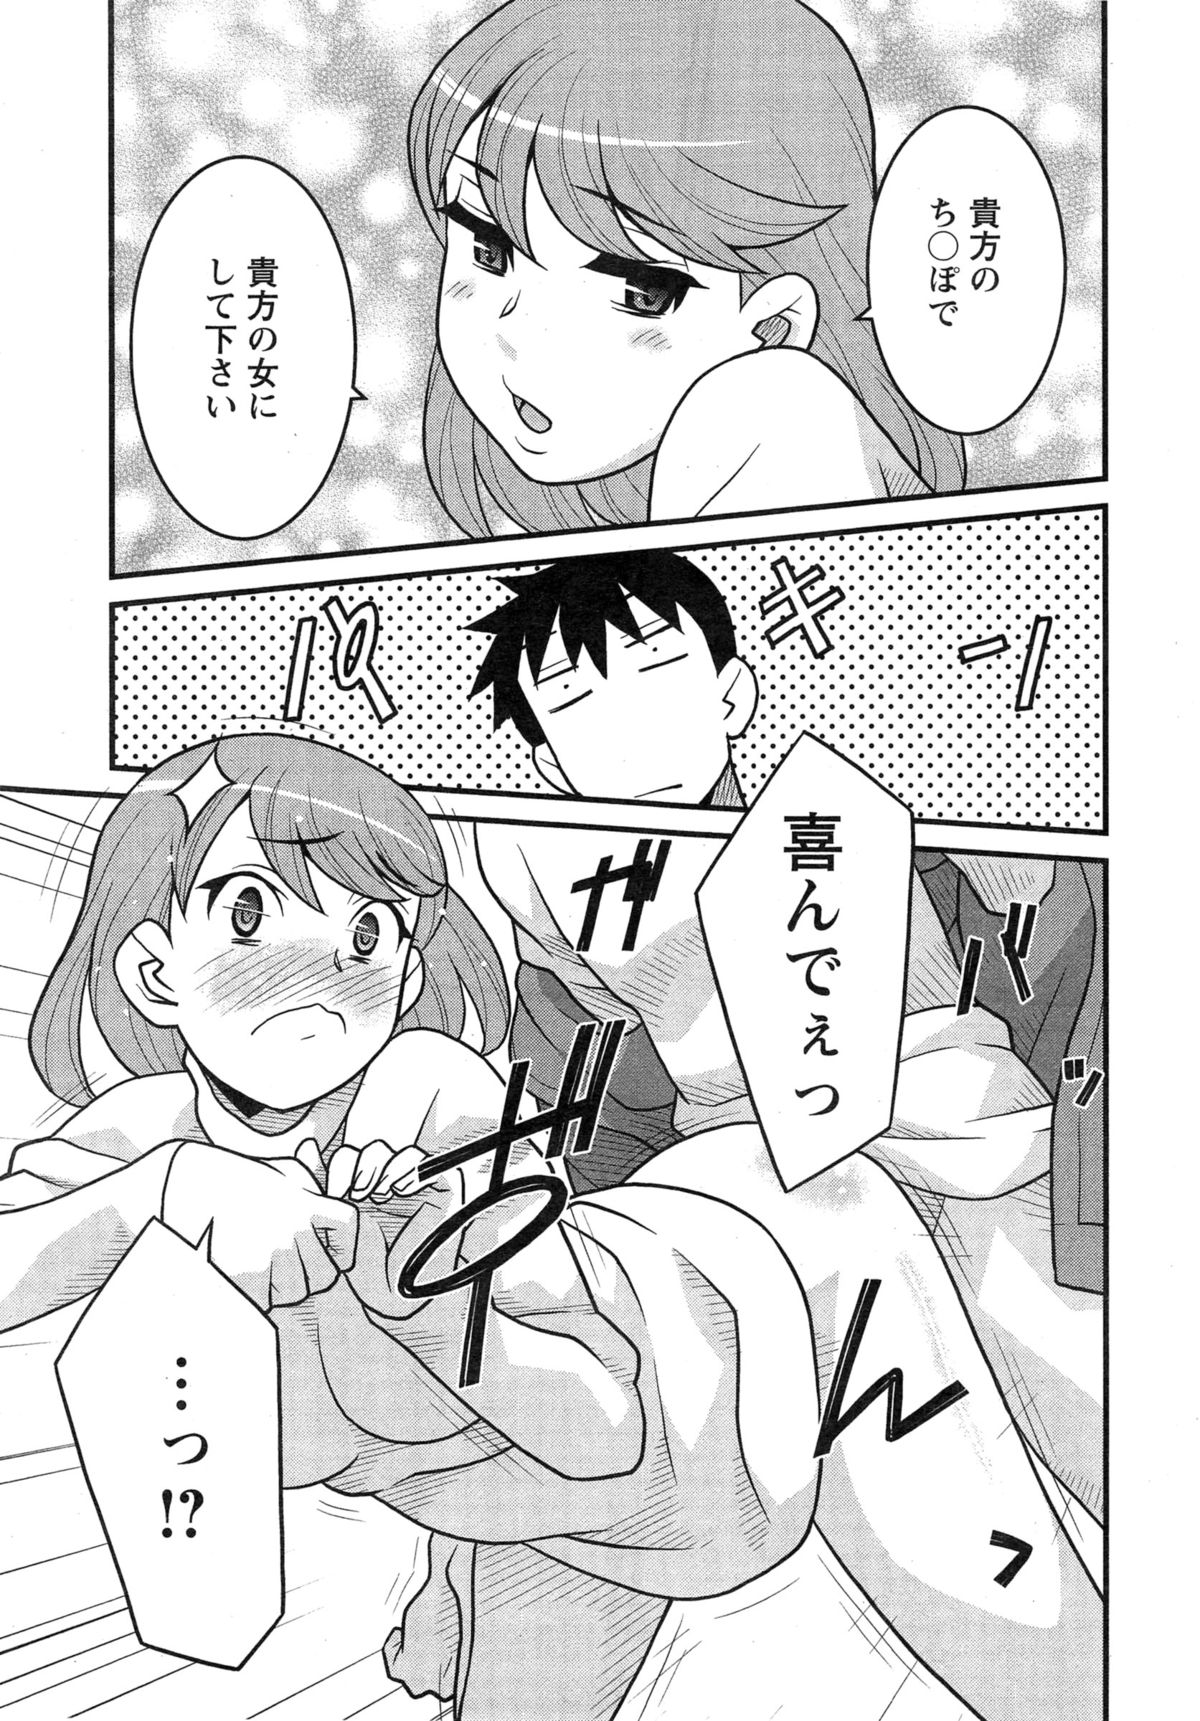 Action Pizazz DX 2015-03 page 19 full